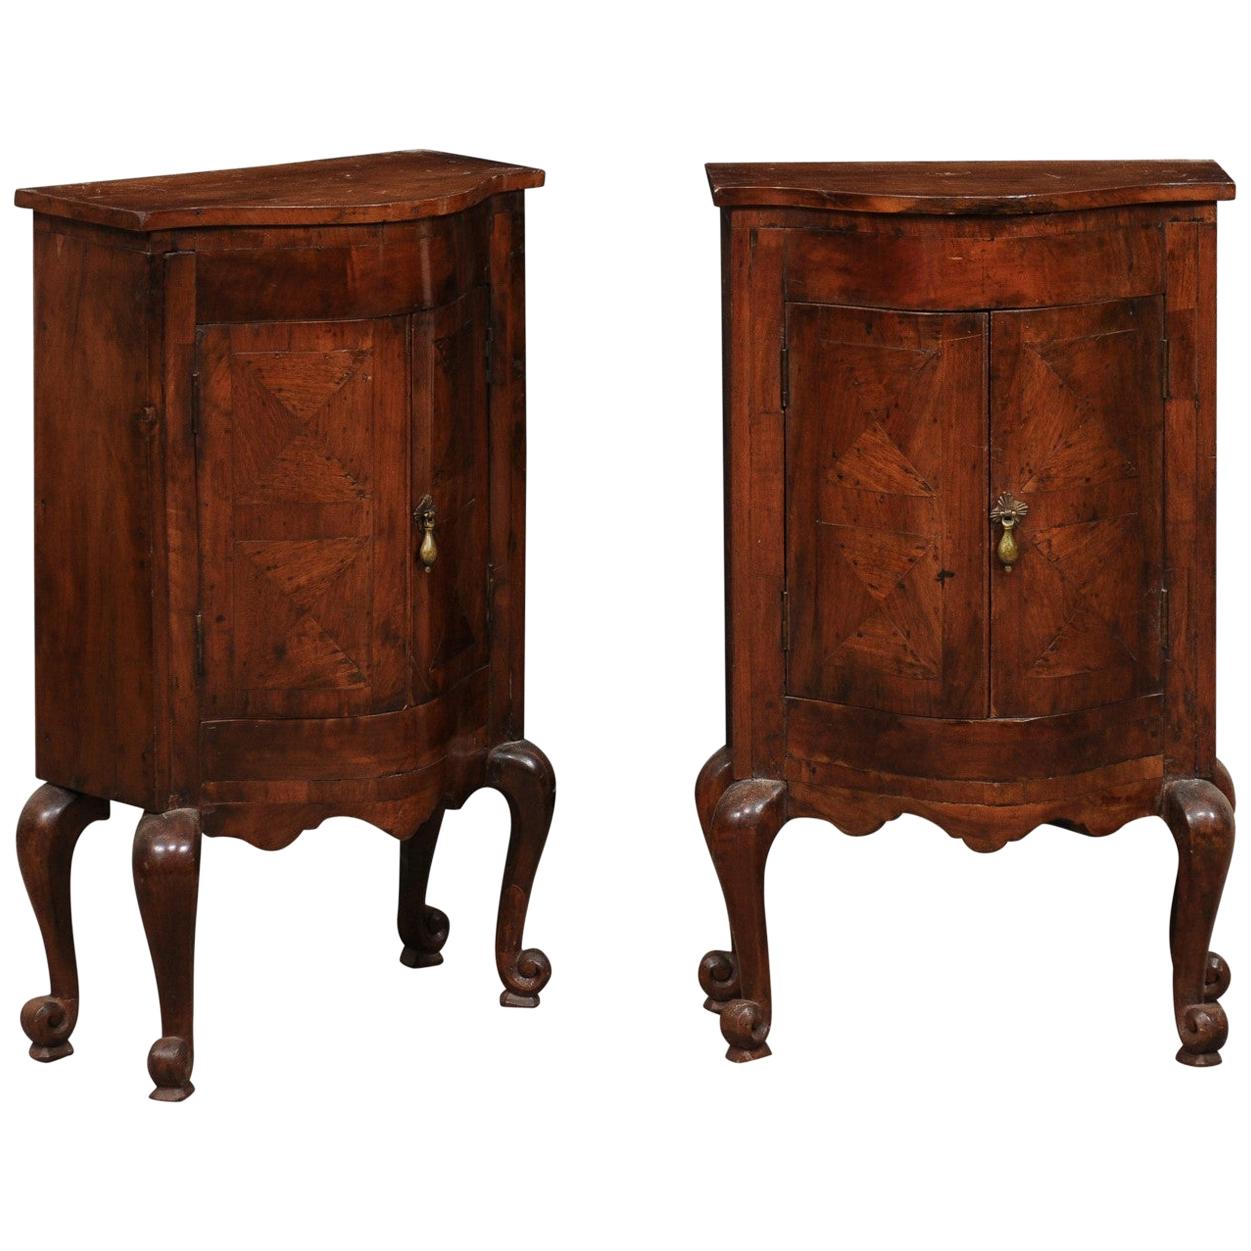 Pair of 18th Century Italian Walnut 2-Door Bow Front Chests, Cute Smaller Size